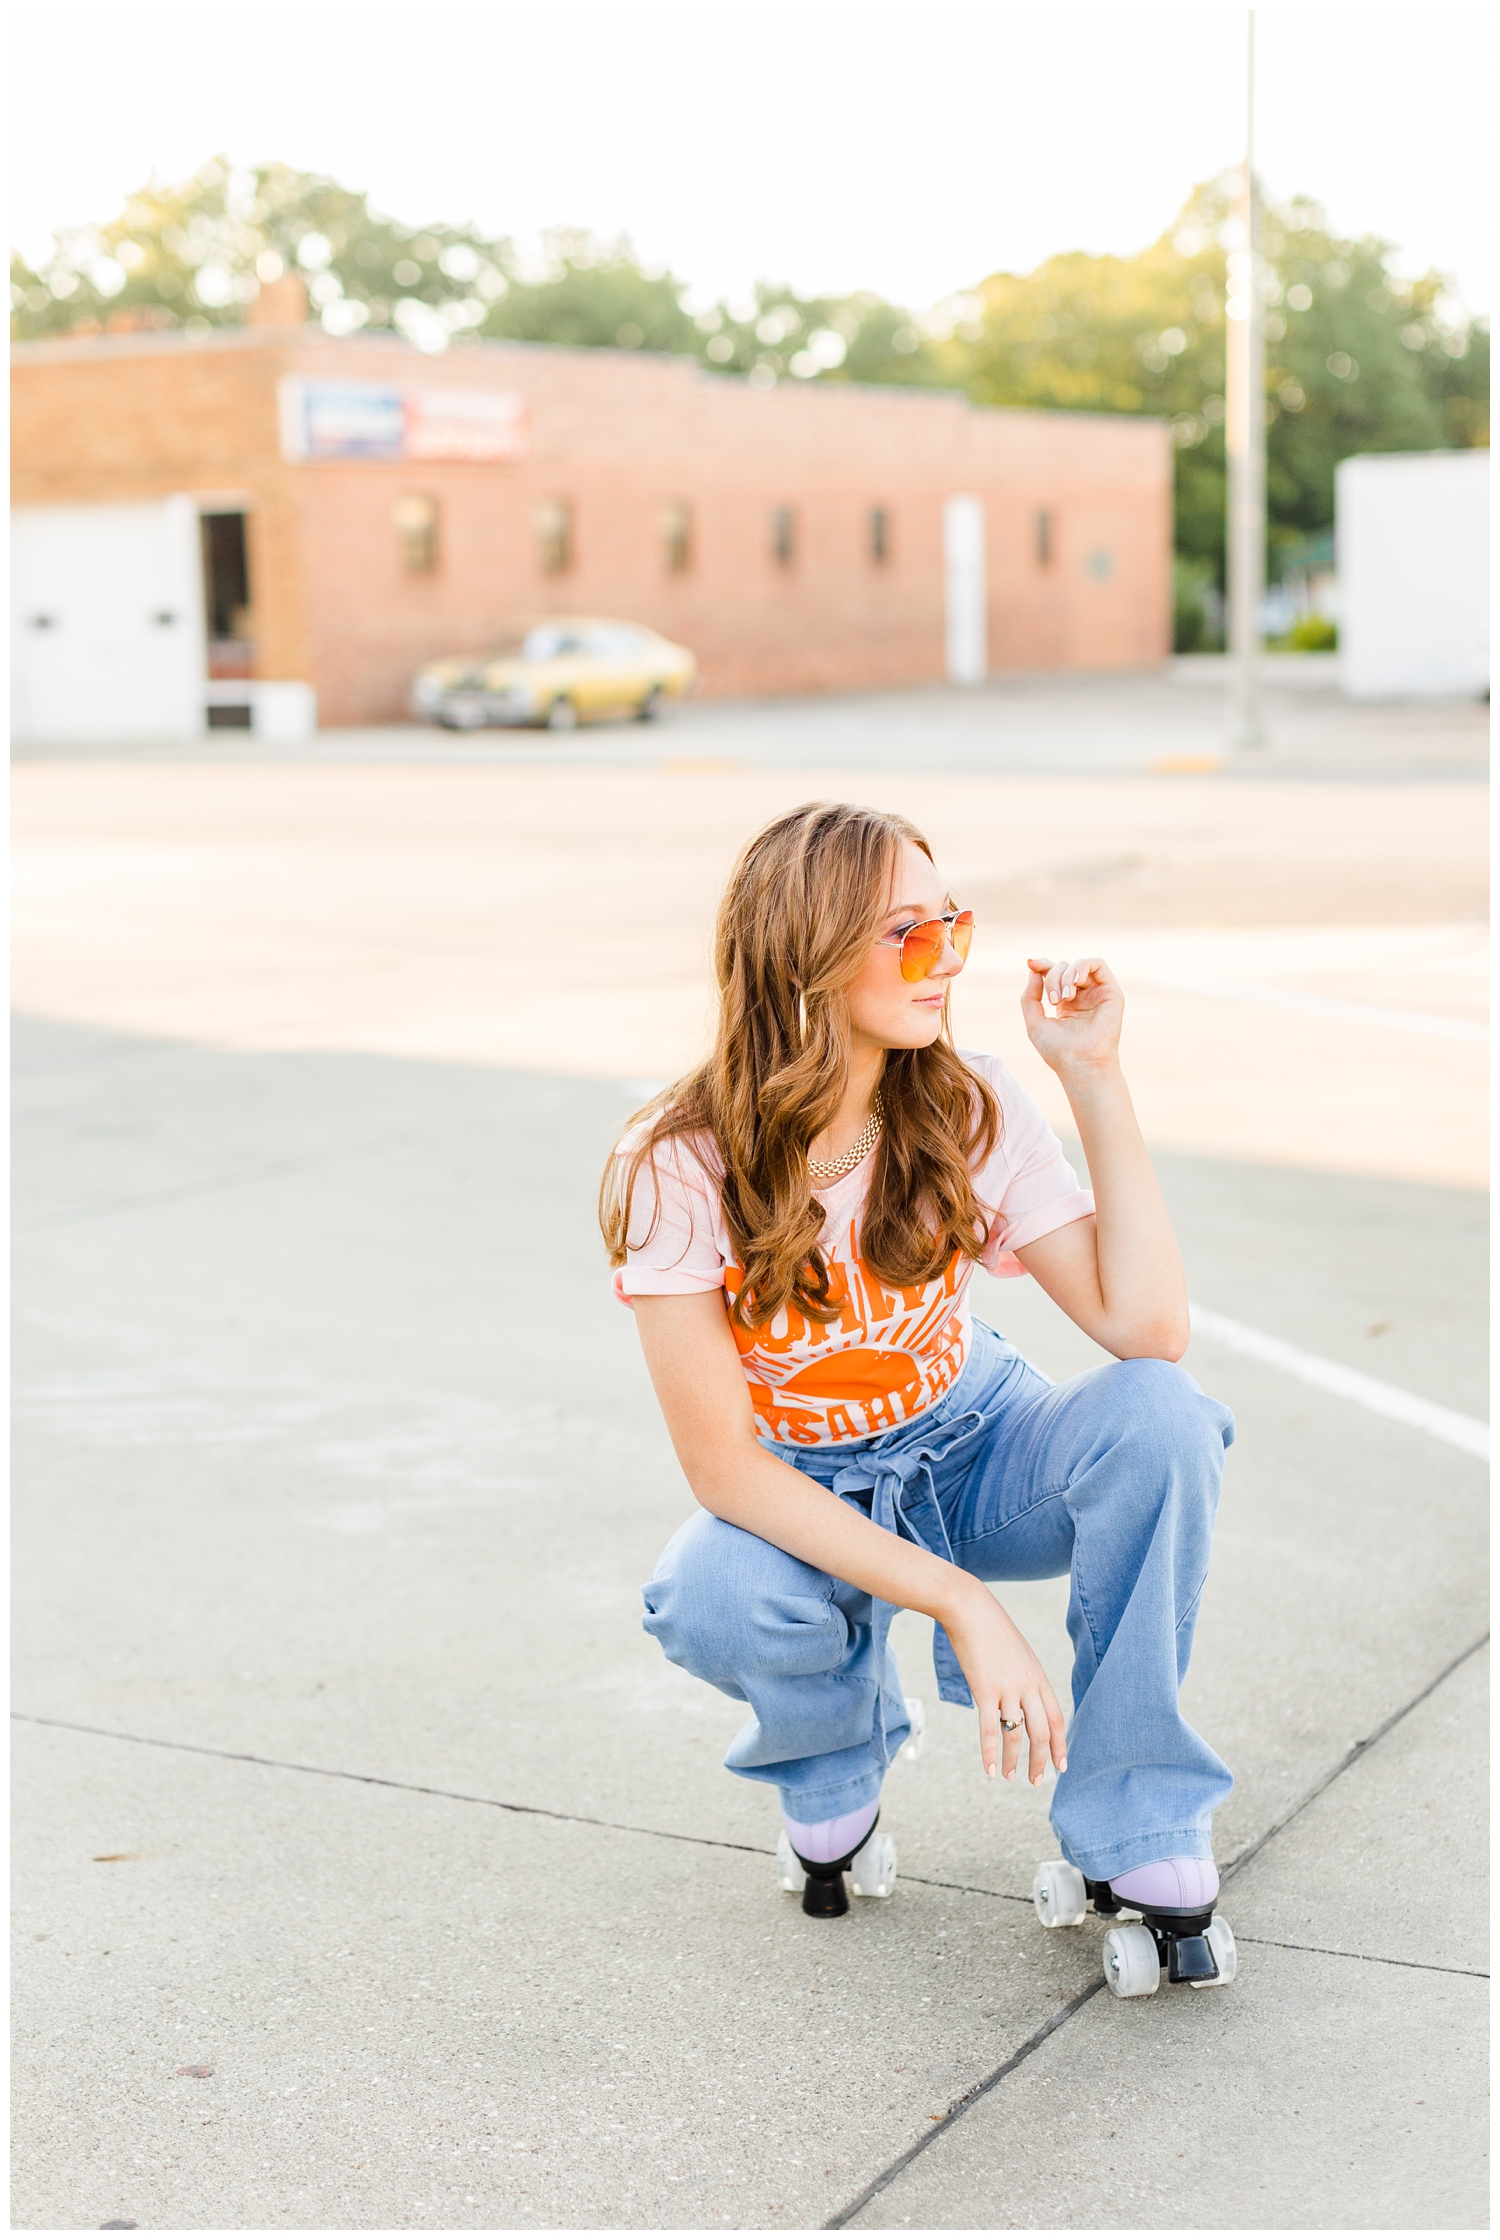 Savannah squats in a parking lot dressed in modern 70s style and roller skates | CB Studio 